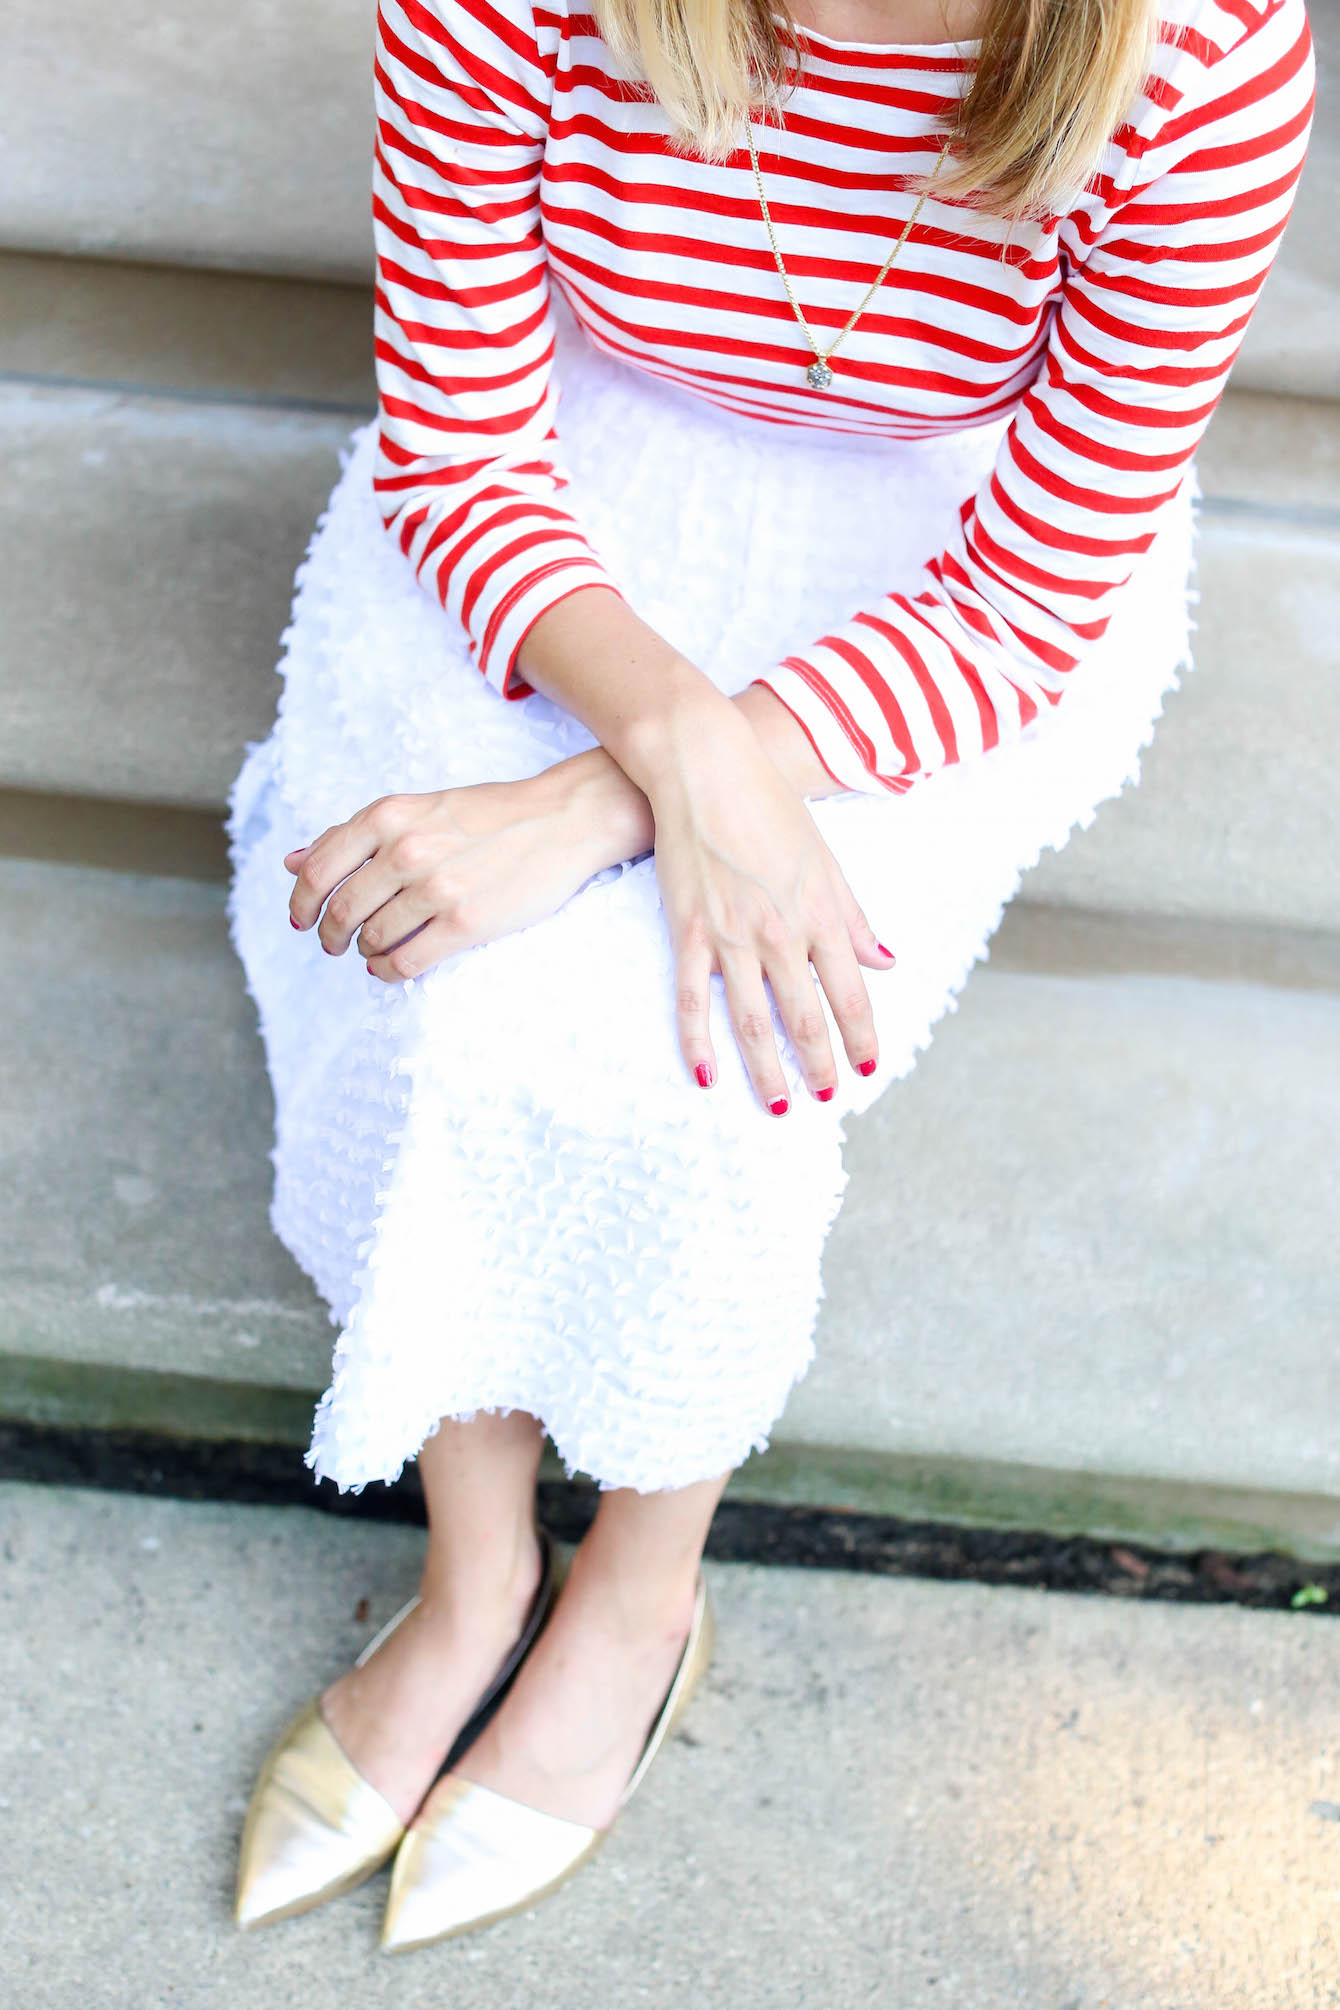 Charmingly-Styled-Stripes (10 of 16)